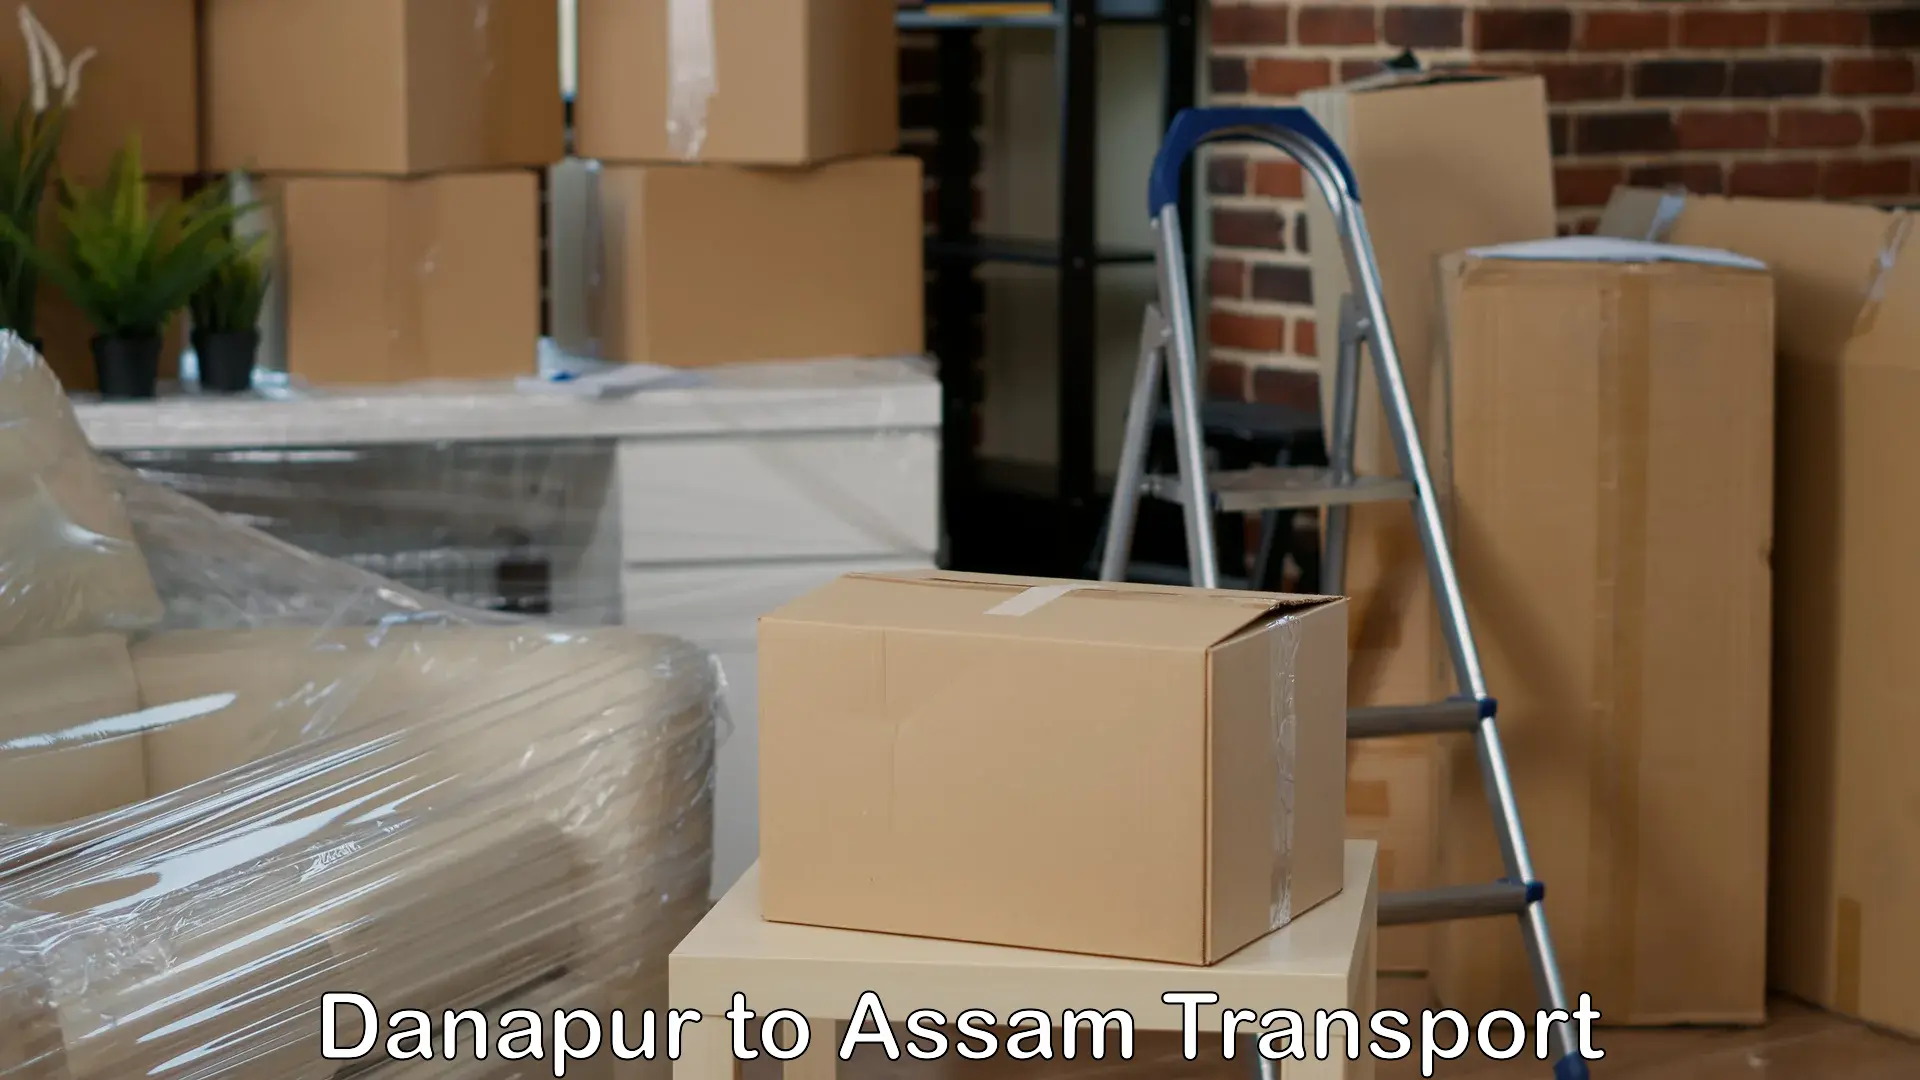 Shipping services in Danapur to Lala Assam